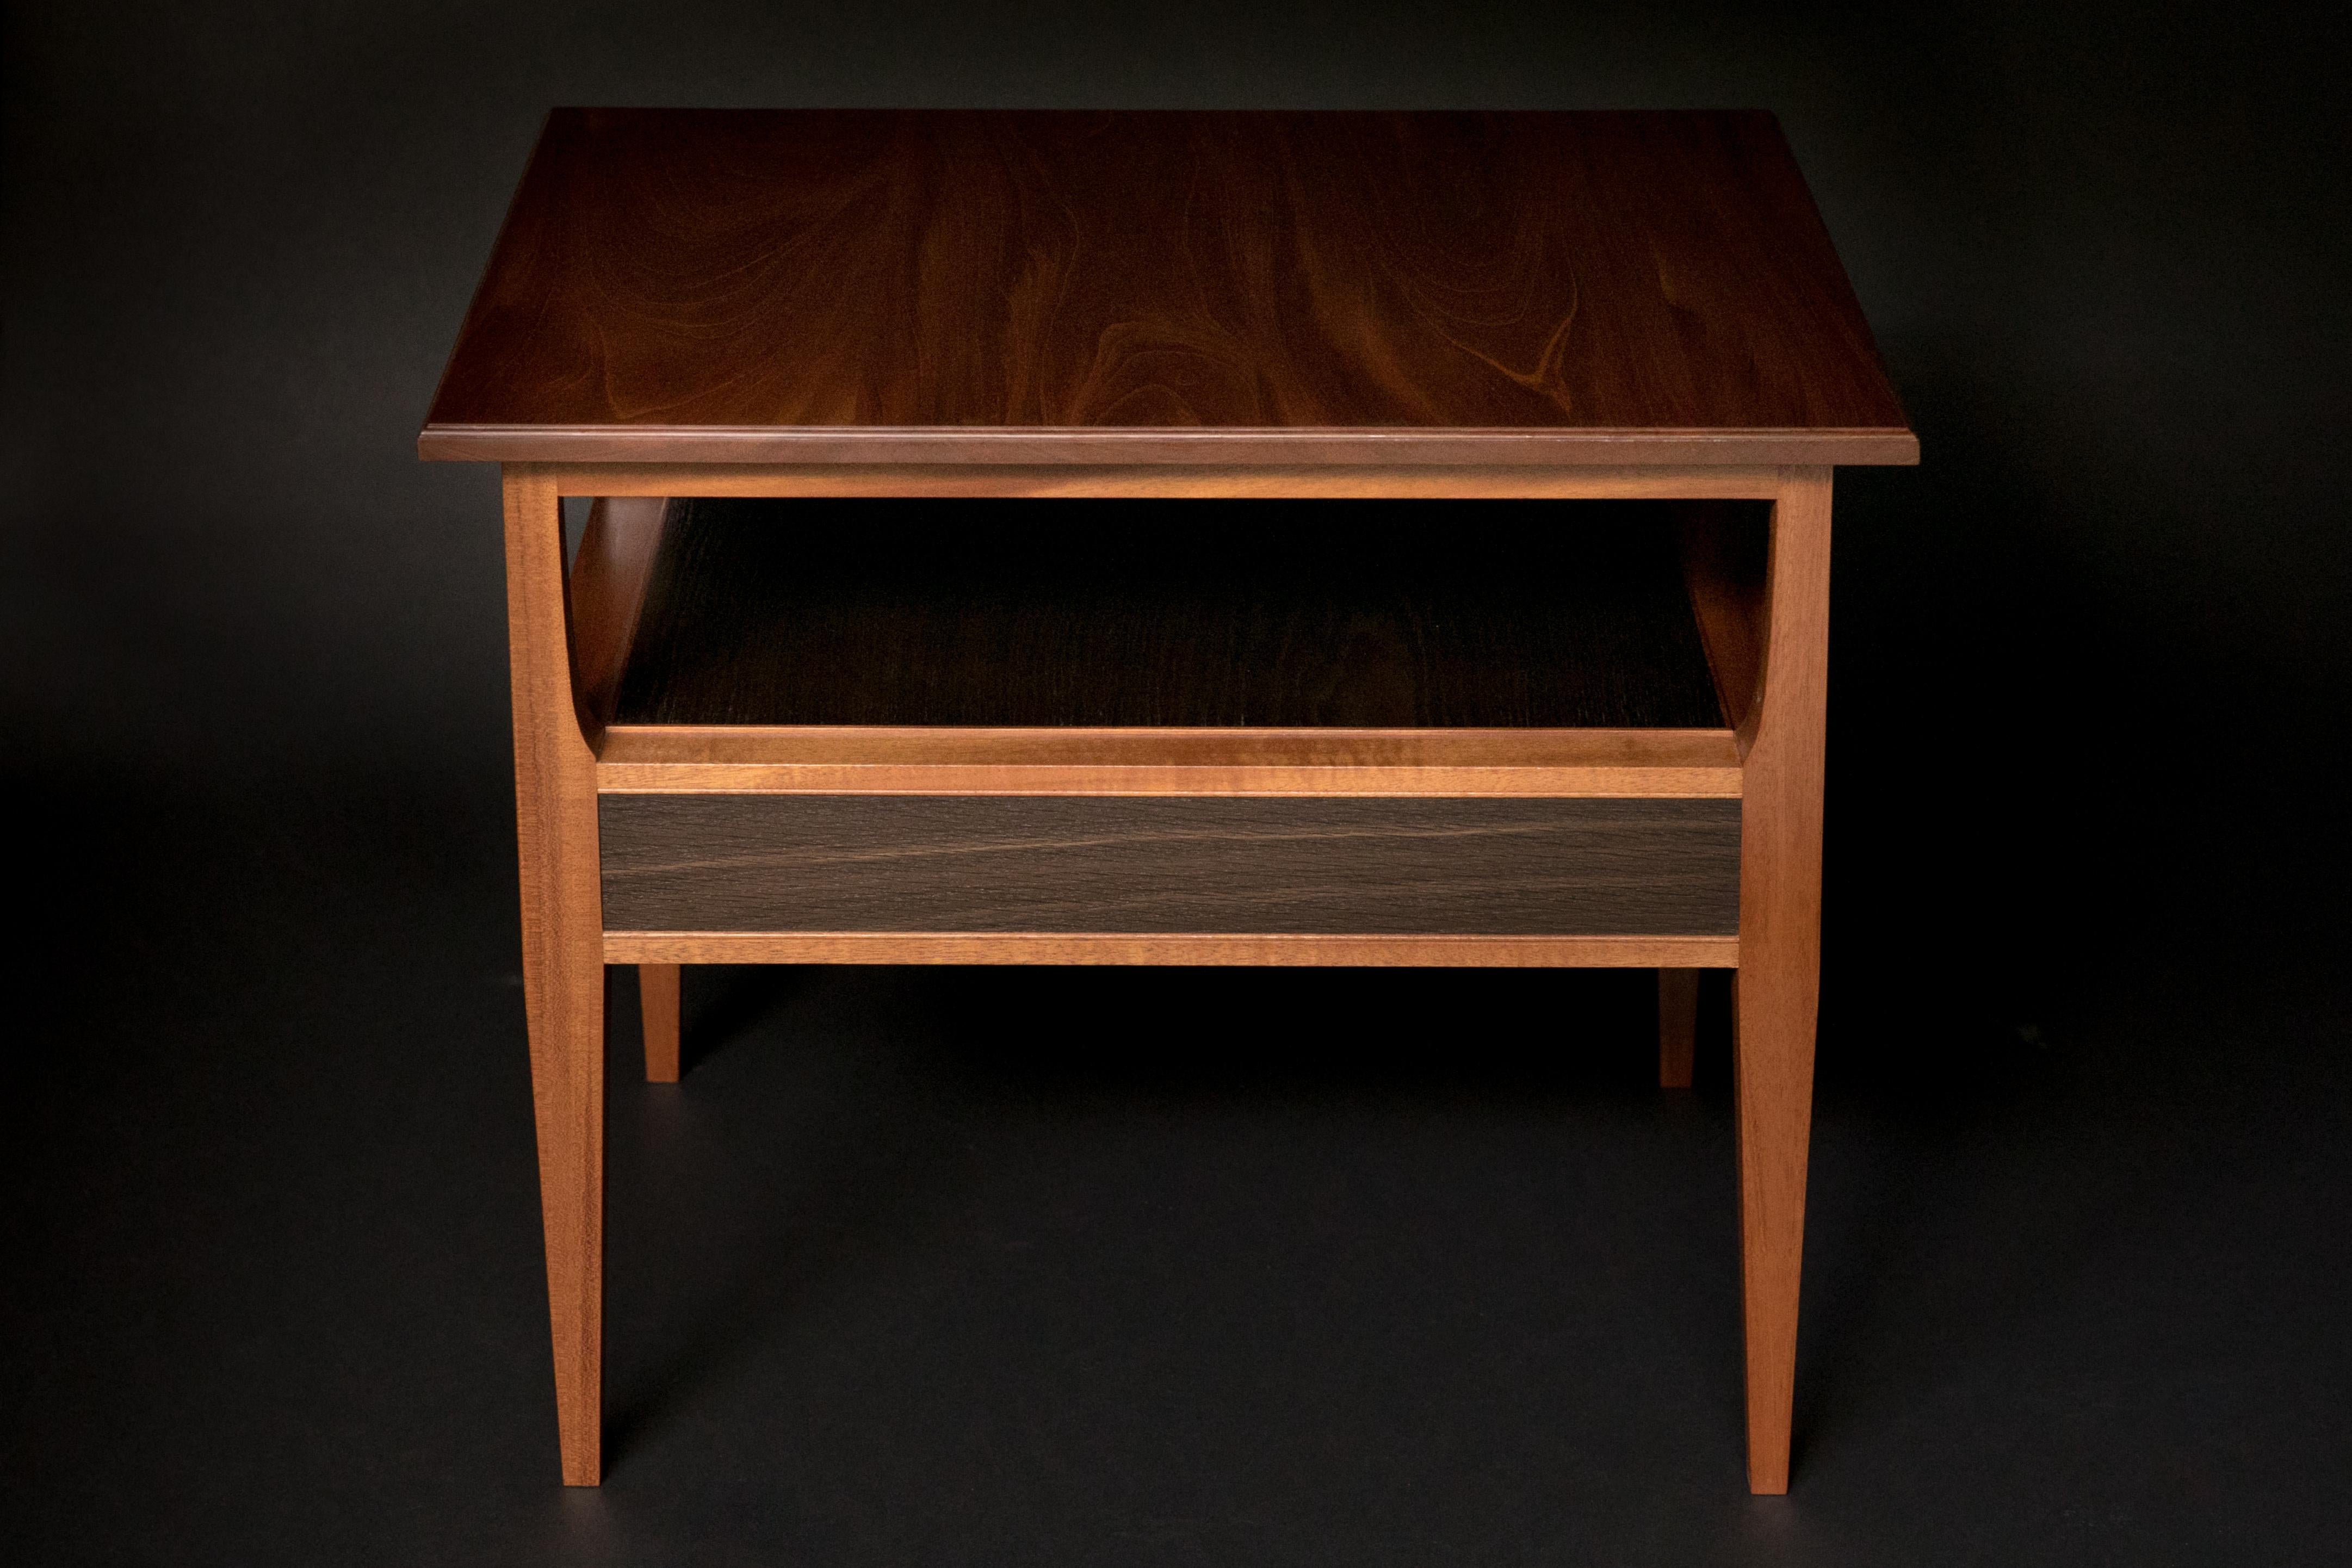 Pair of Mahogany and Fumed Oak Side Tables/Nightstands with Drawer & Shelf In New Condition For Sale In Durham, NC